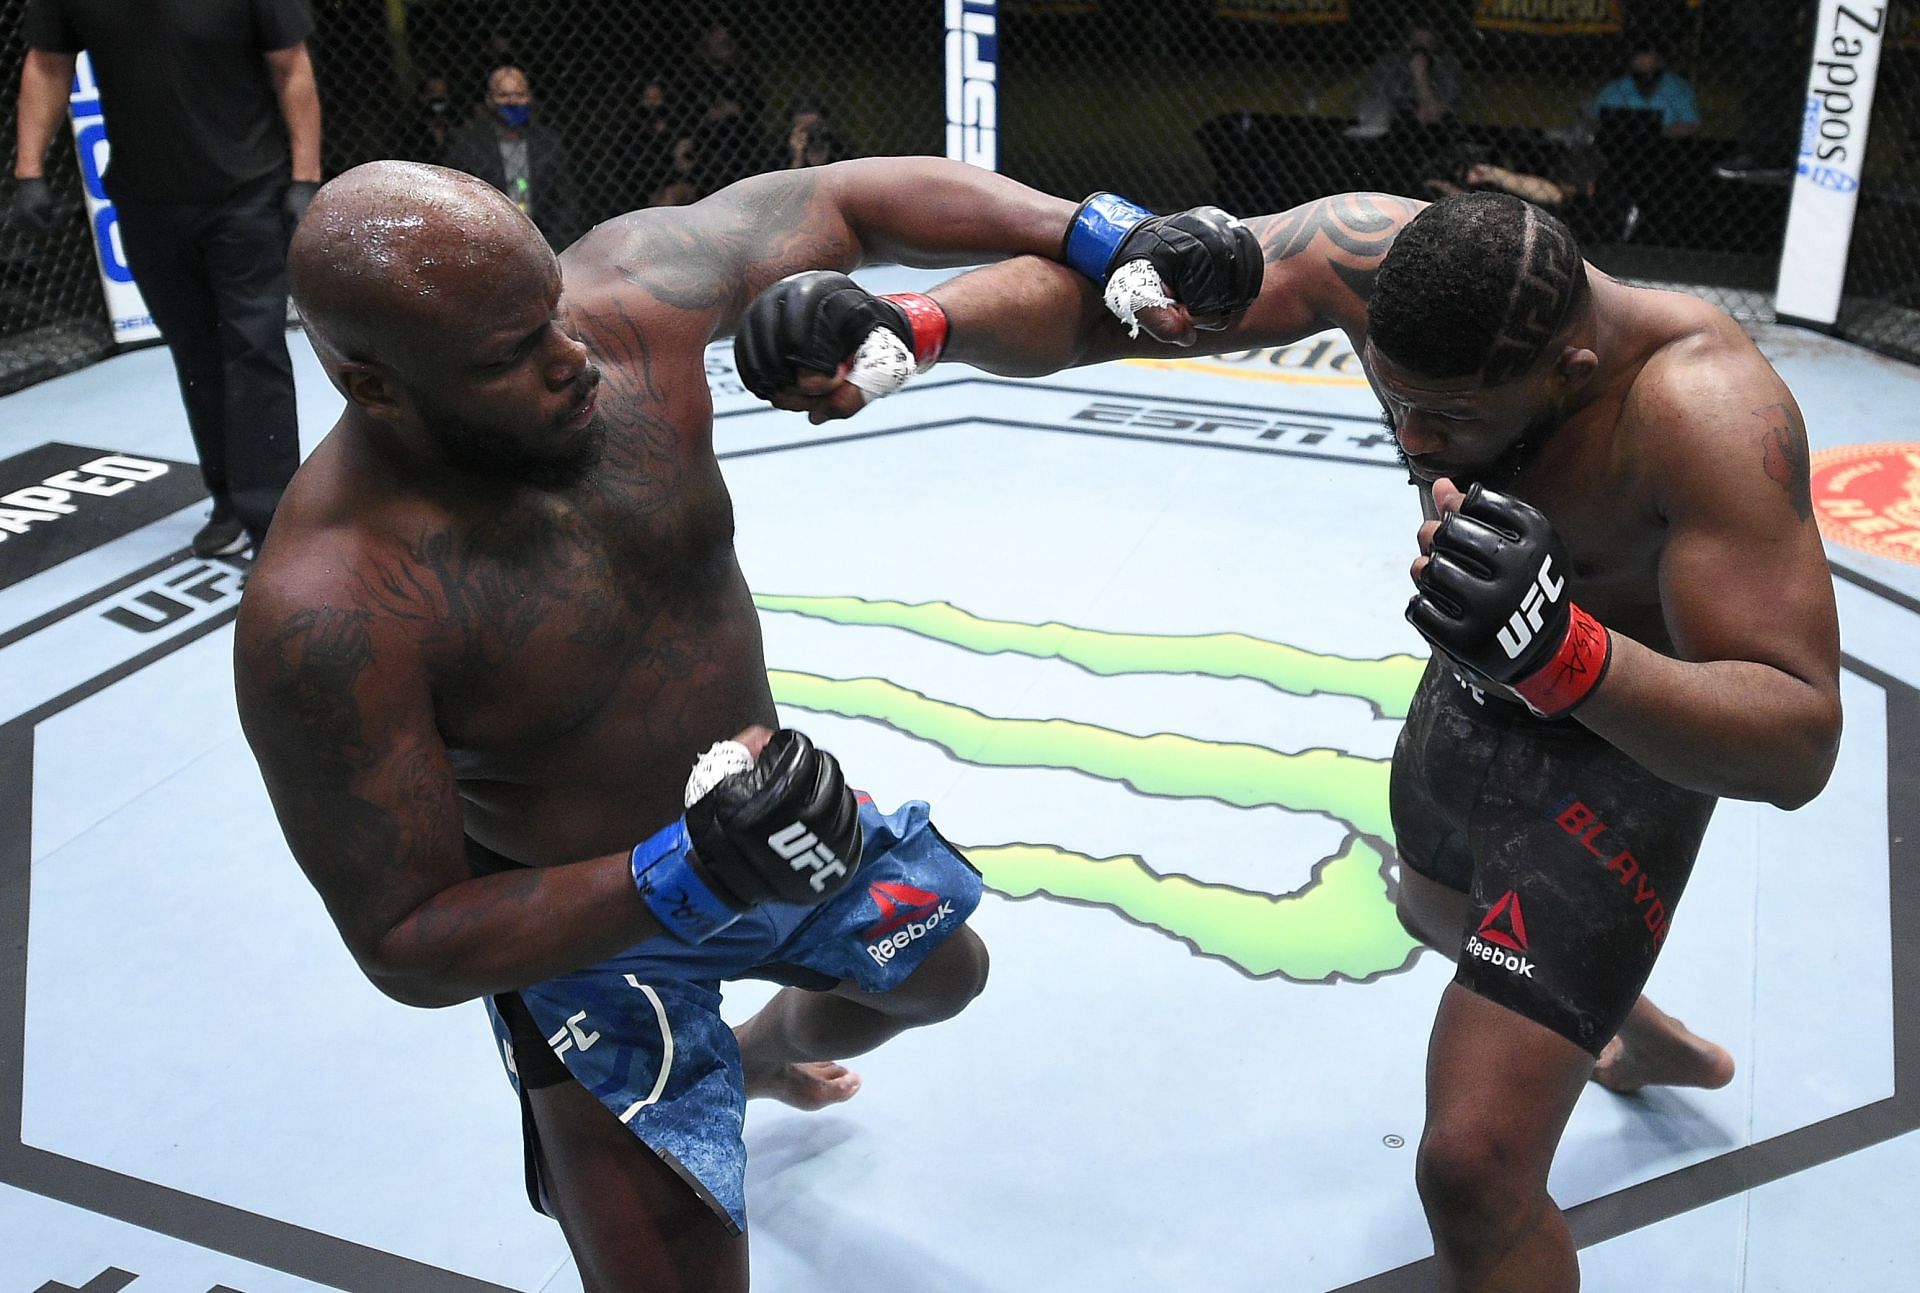 Any hopes Curtis Blaydes had of claiming a UFC title shot went up in flames at the hands of Derrick Lewis